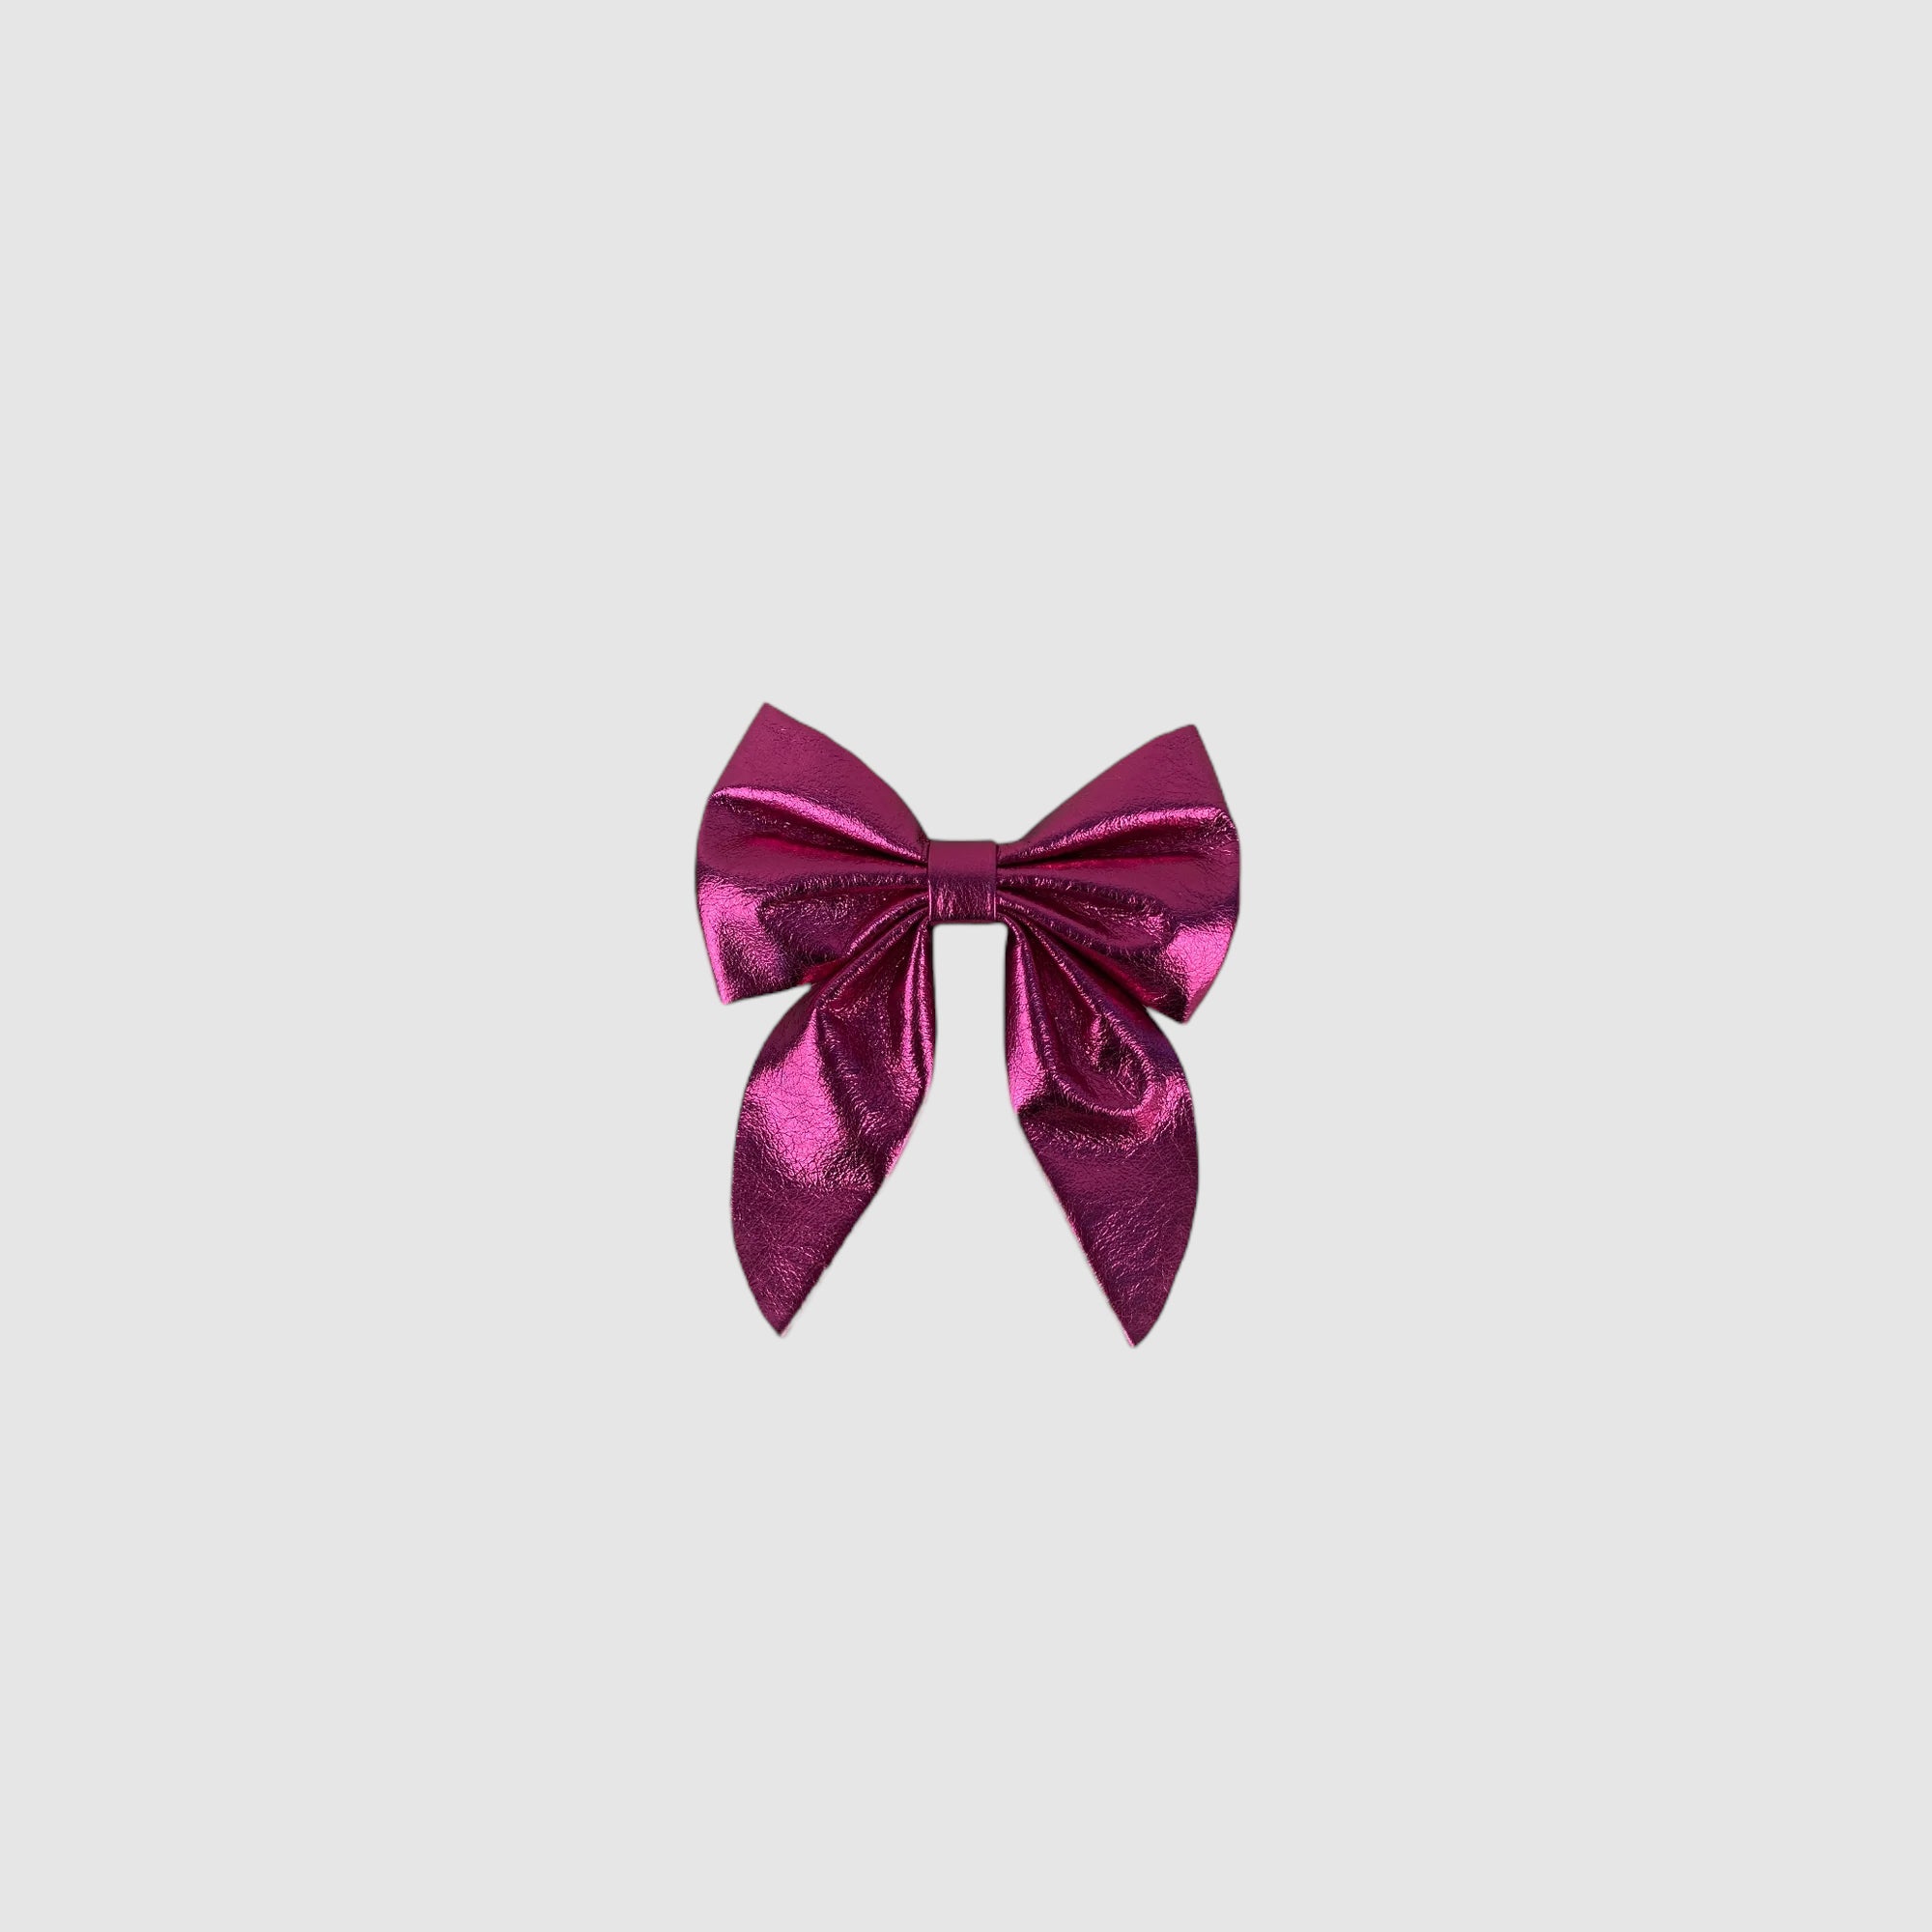 WINGED NECK BOW // WRONG PINK